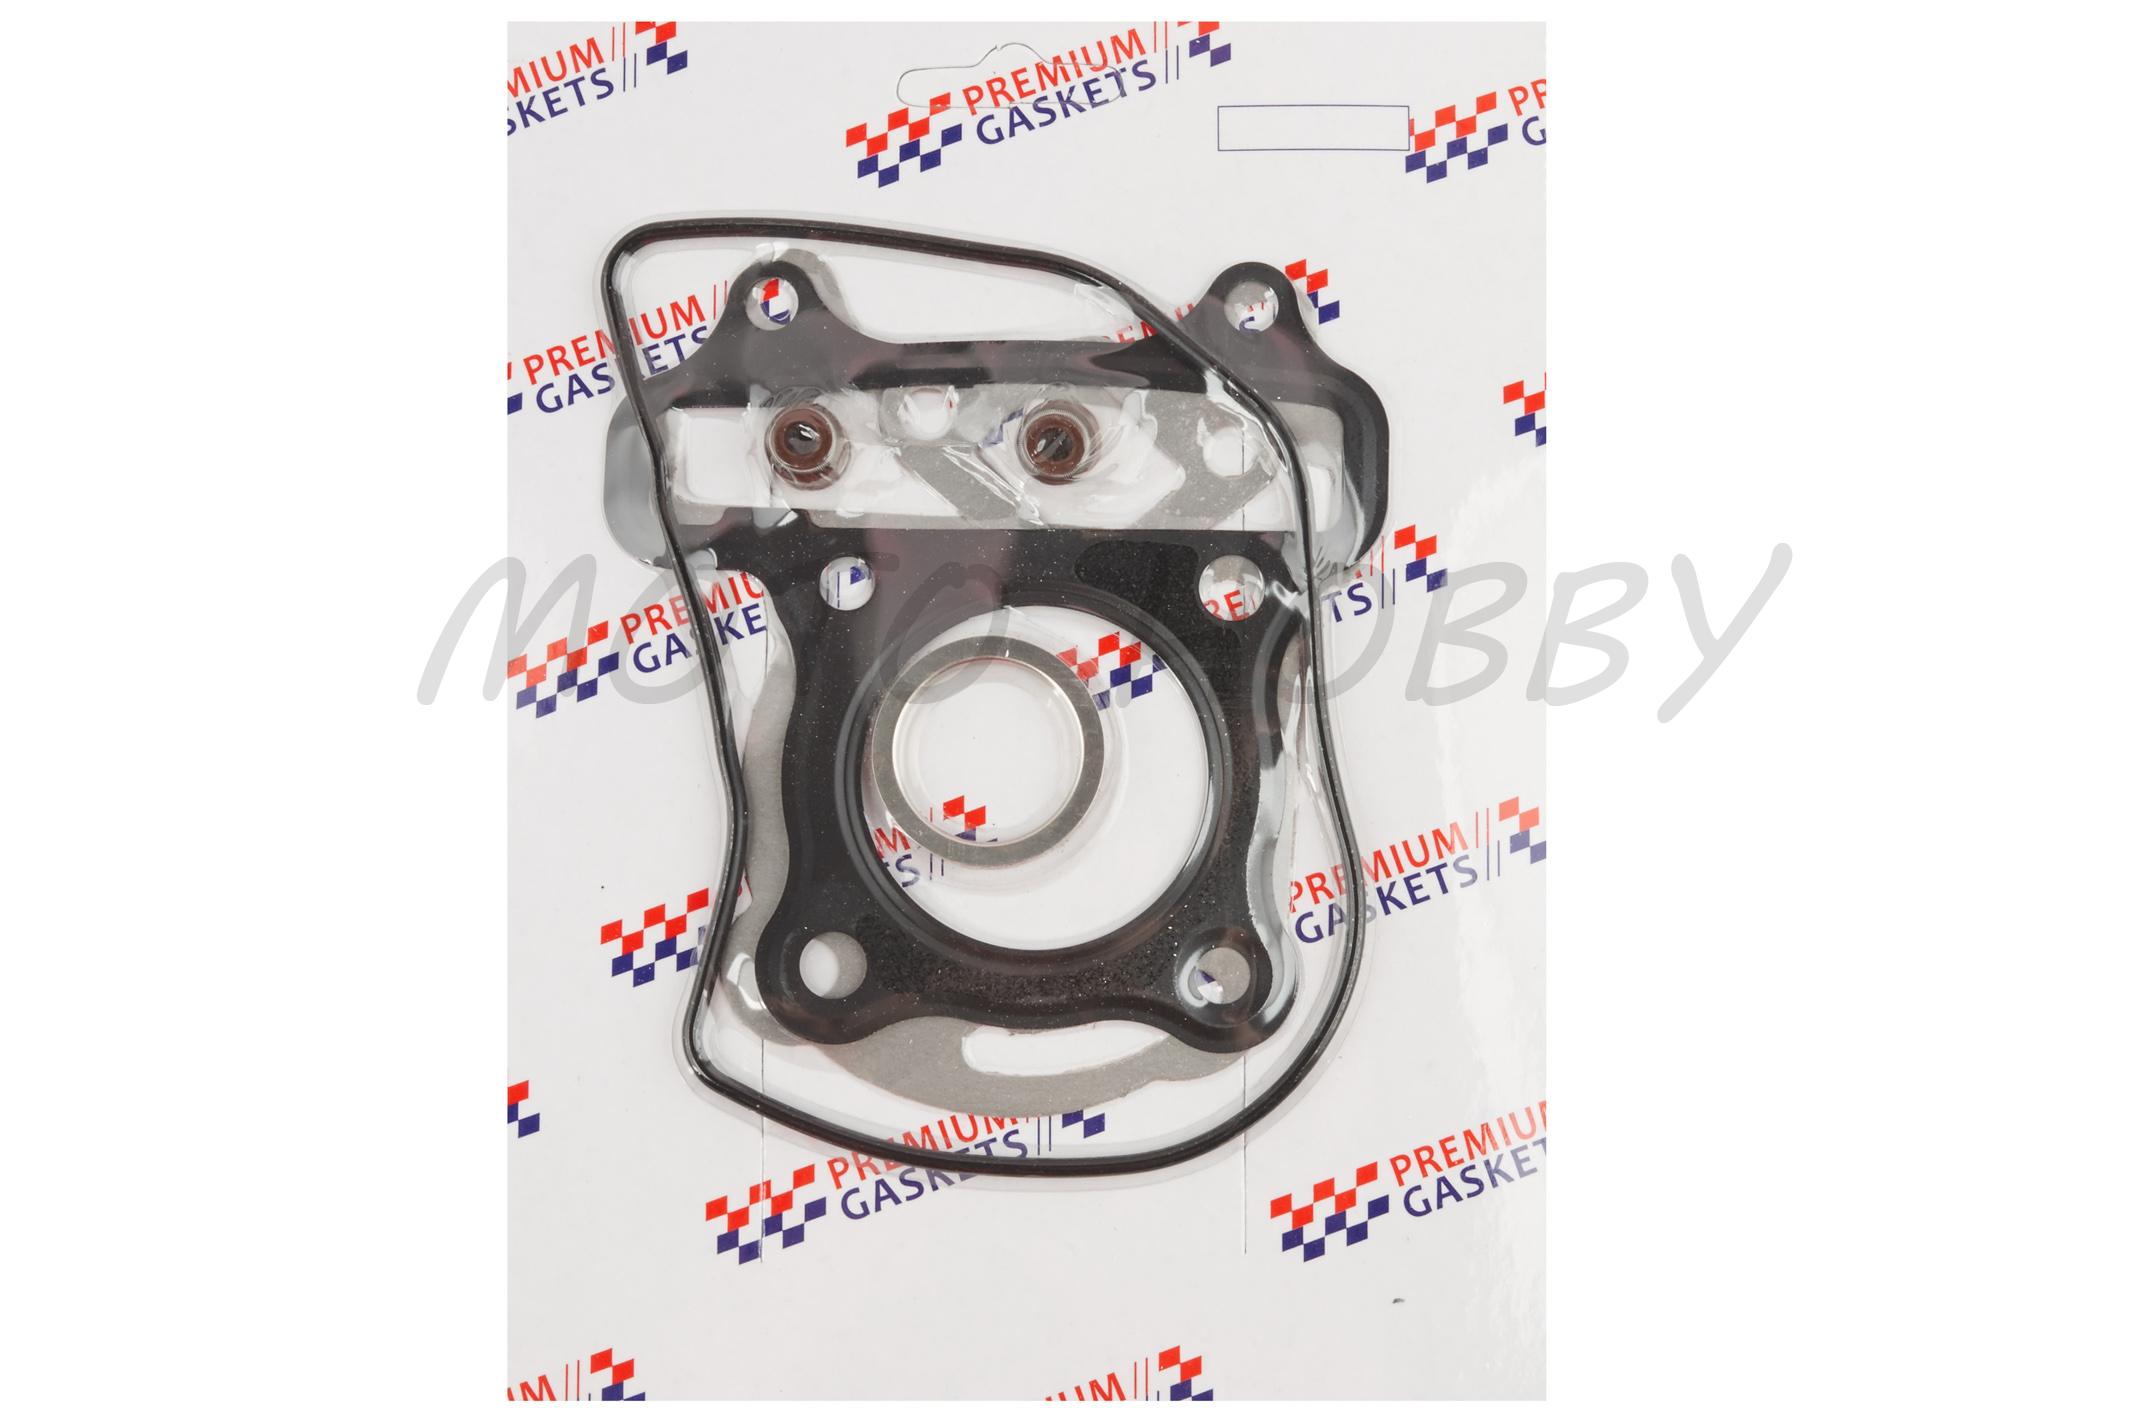   ()   4T GY6 60   ?44mm   (mod C)   MAX GASKETS P-1967